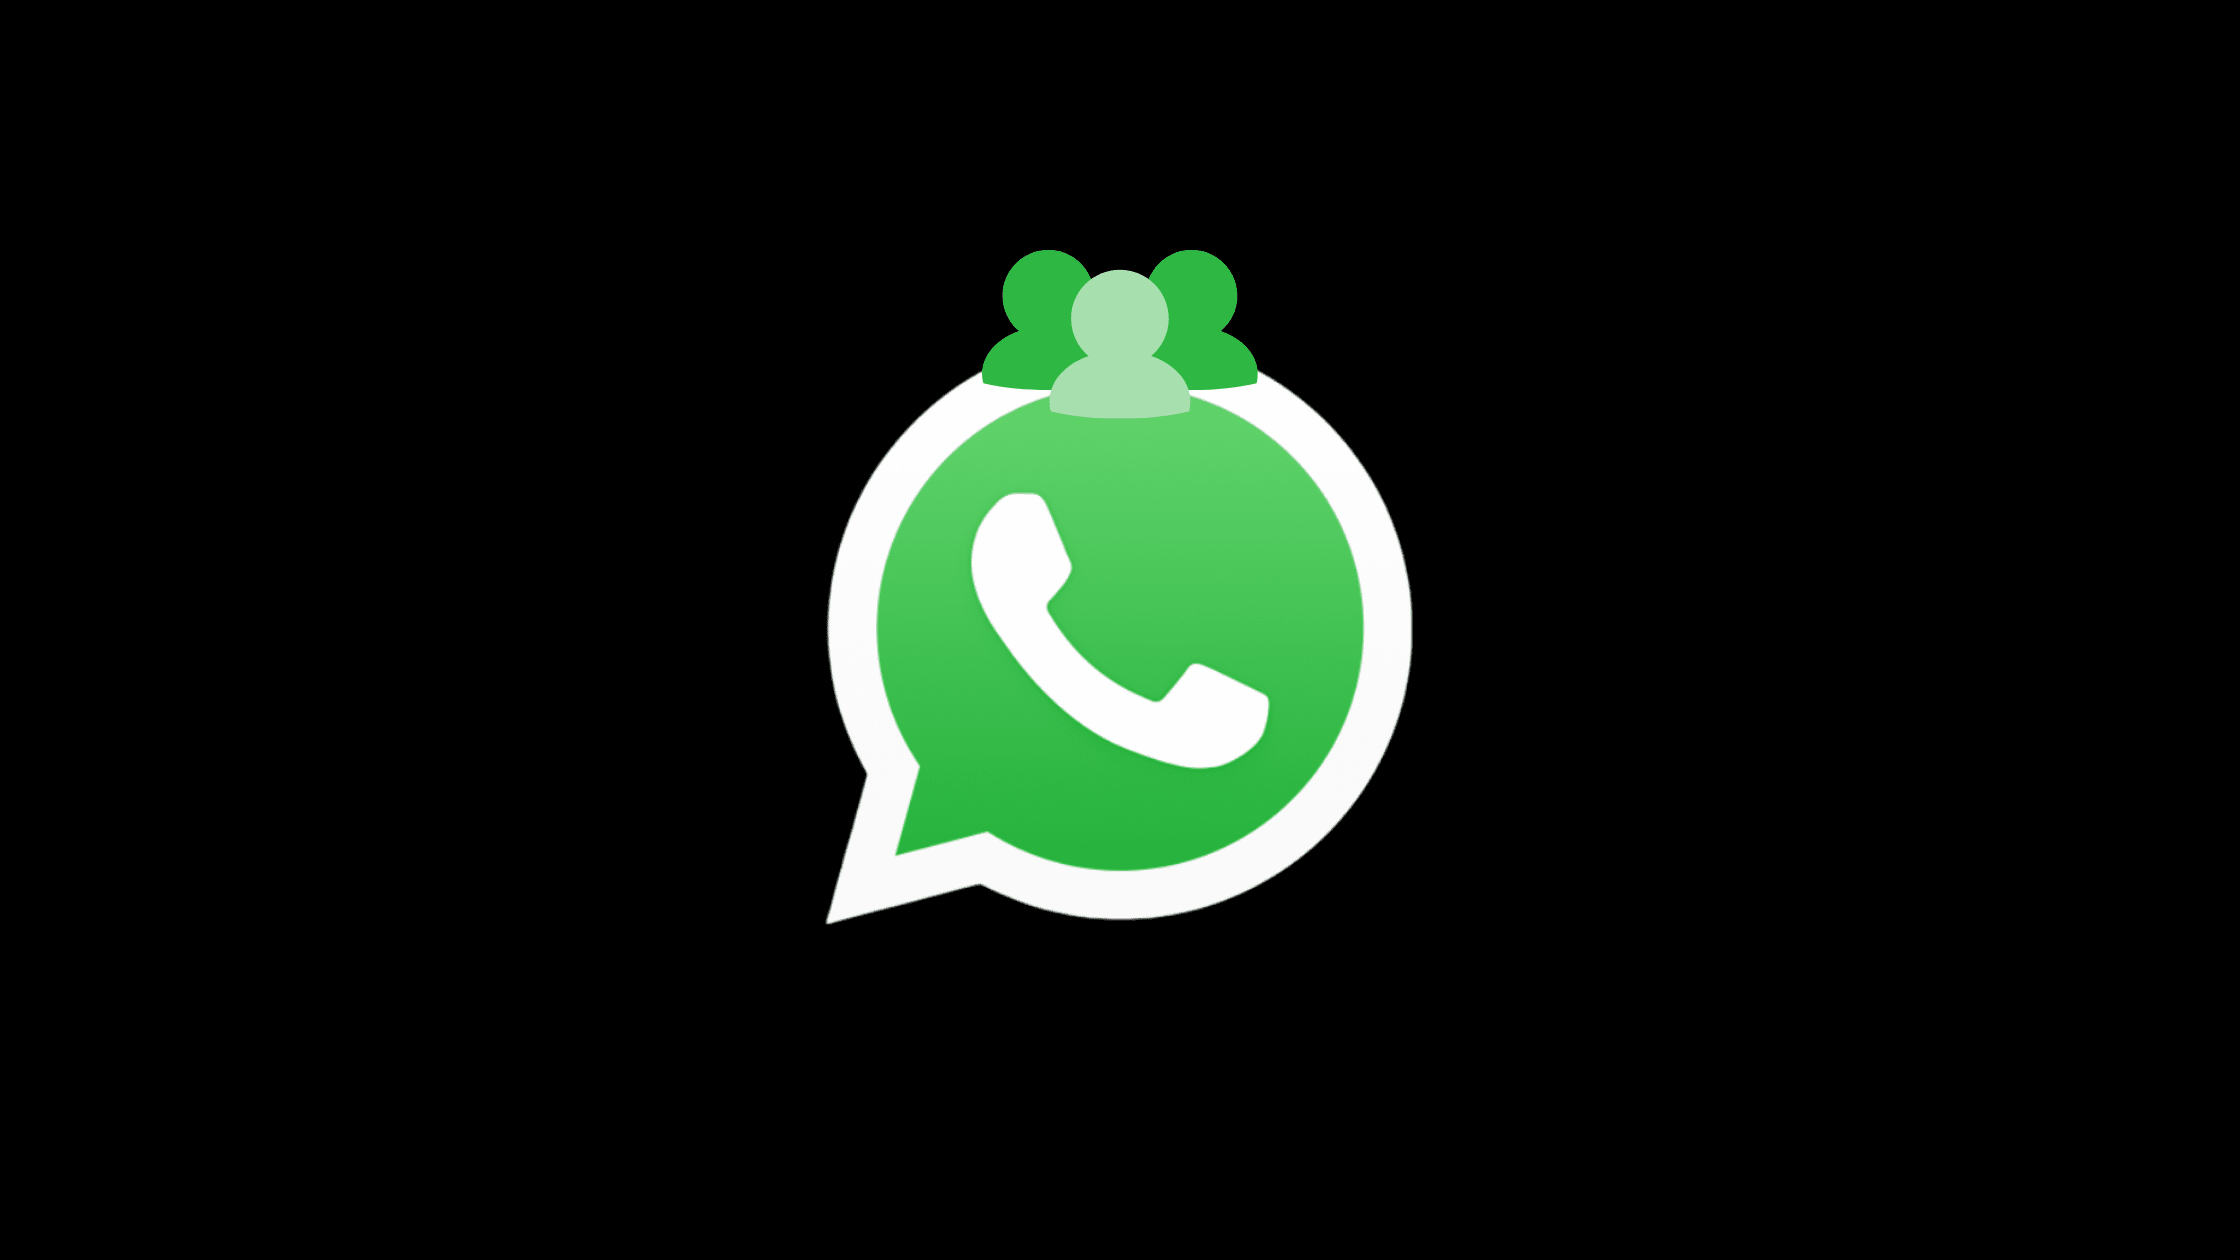 How to Stop People from Adding you to WhatsApp Groups